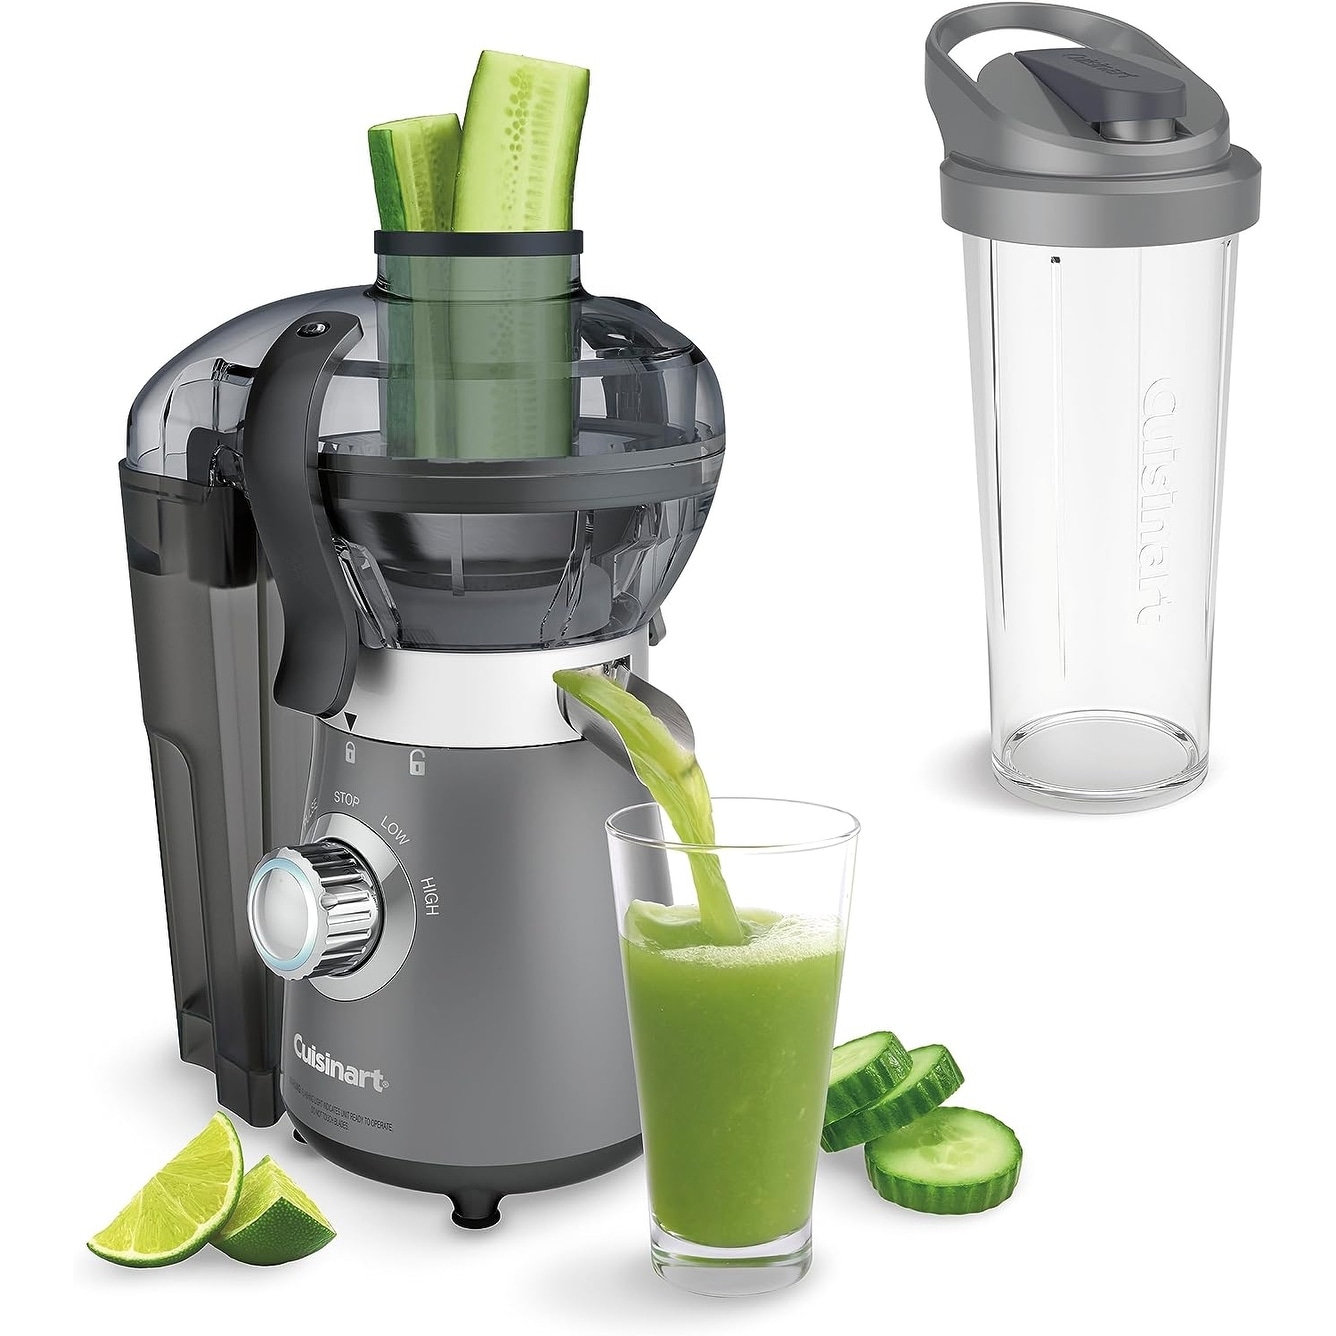 https://ak1.ostkcdn.com/images/products/is/images/direct/77af42ea3607ceddf39d0116150d774ba3bdb7b5/Cuisinart-Compact-Blender-and-Juicer-Combo%2C-One-Size%2C-Stainless-Steel.jpg